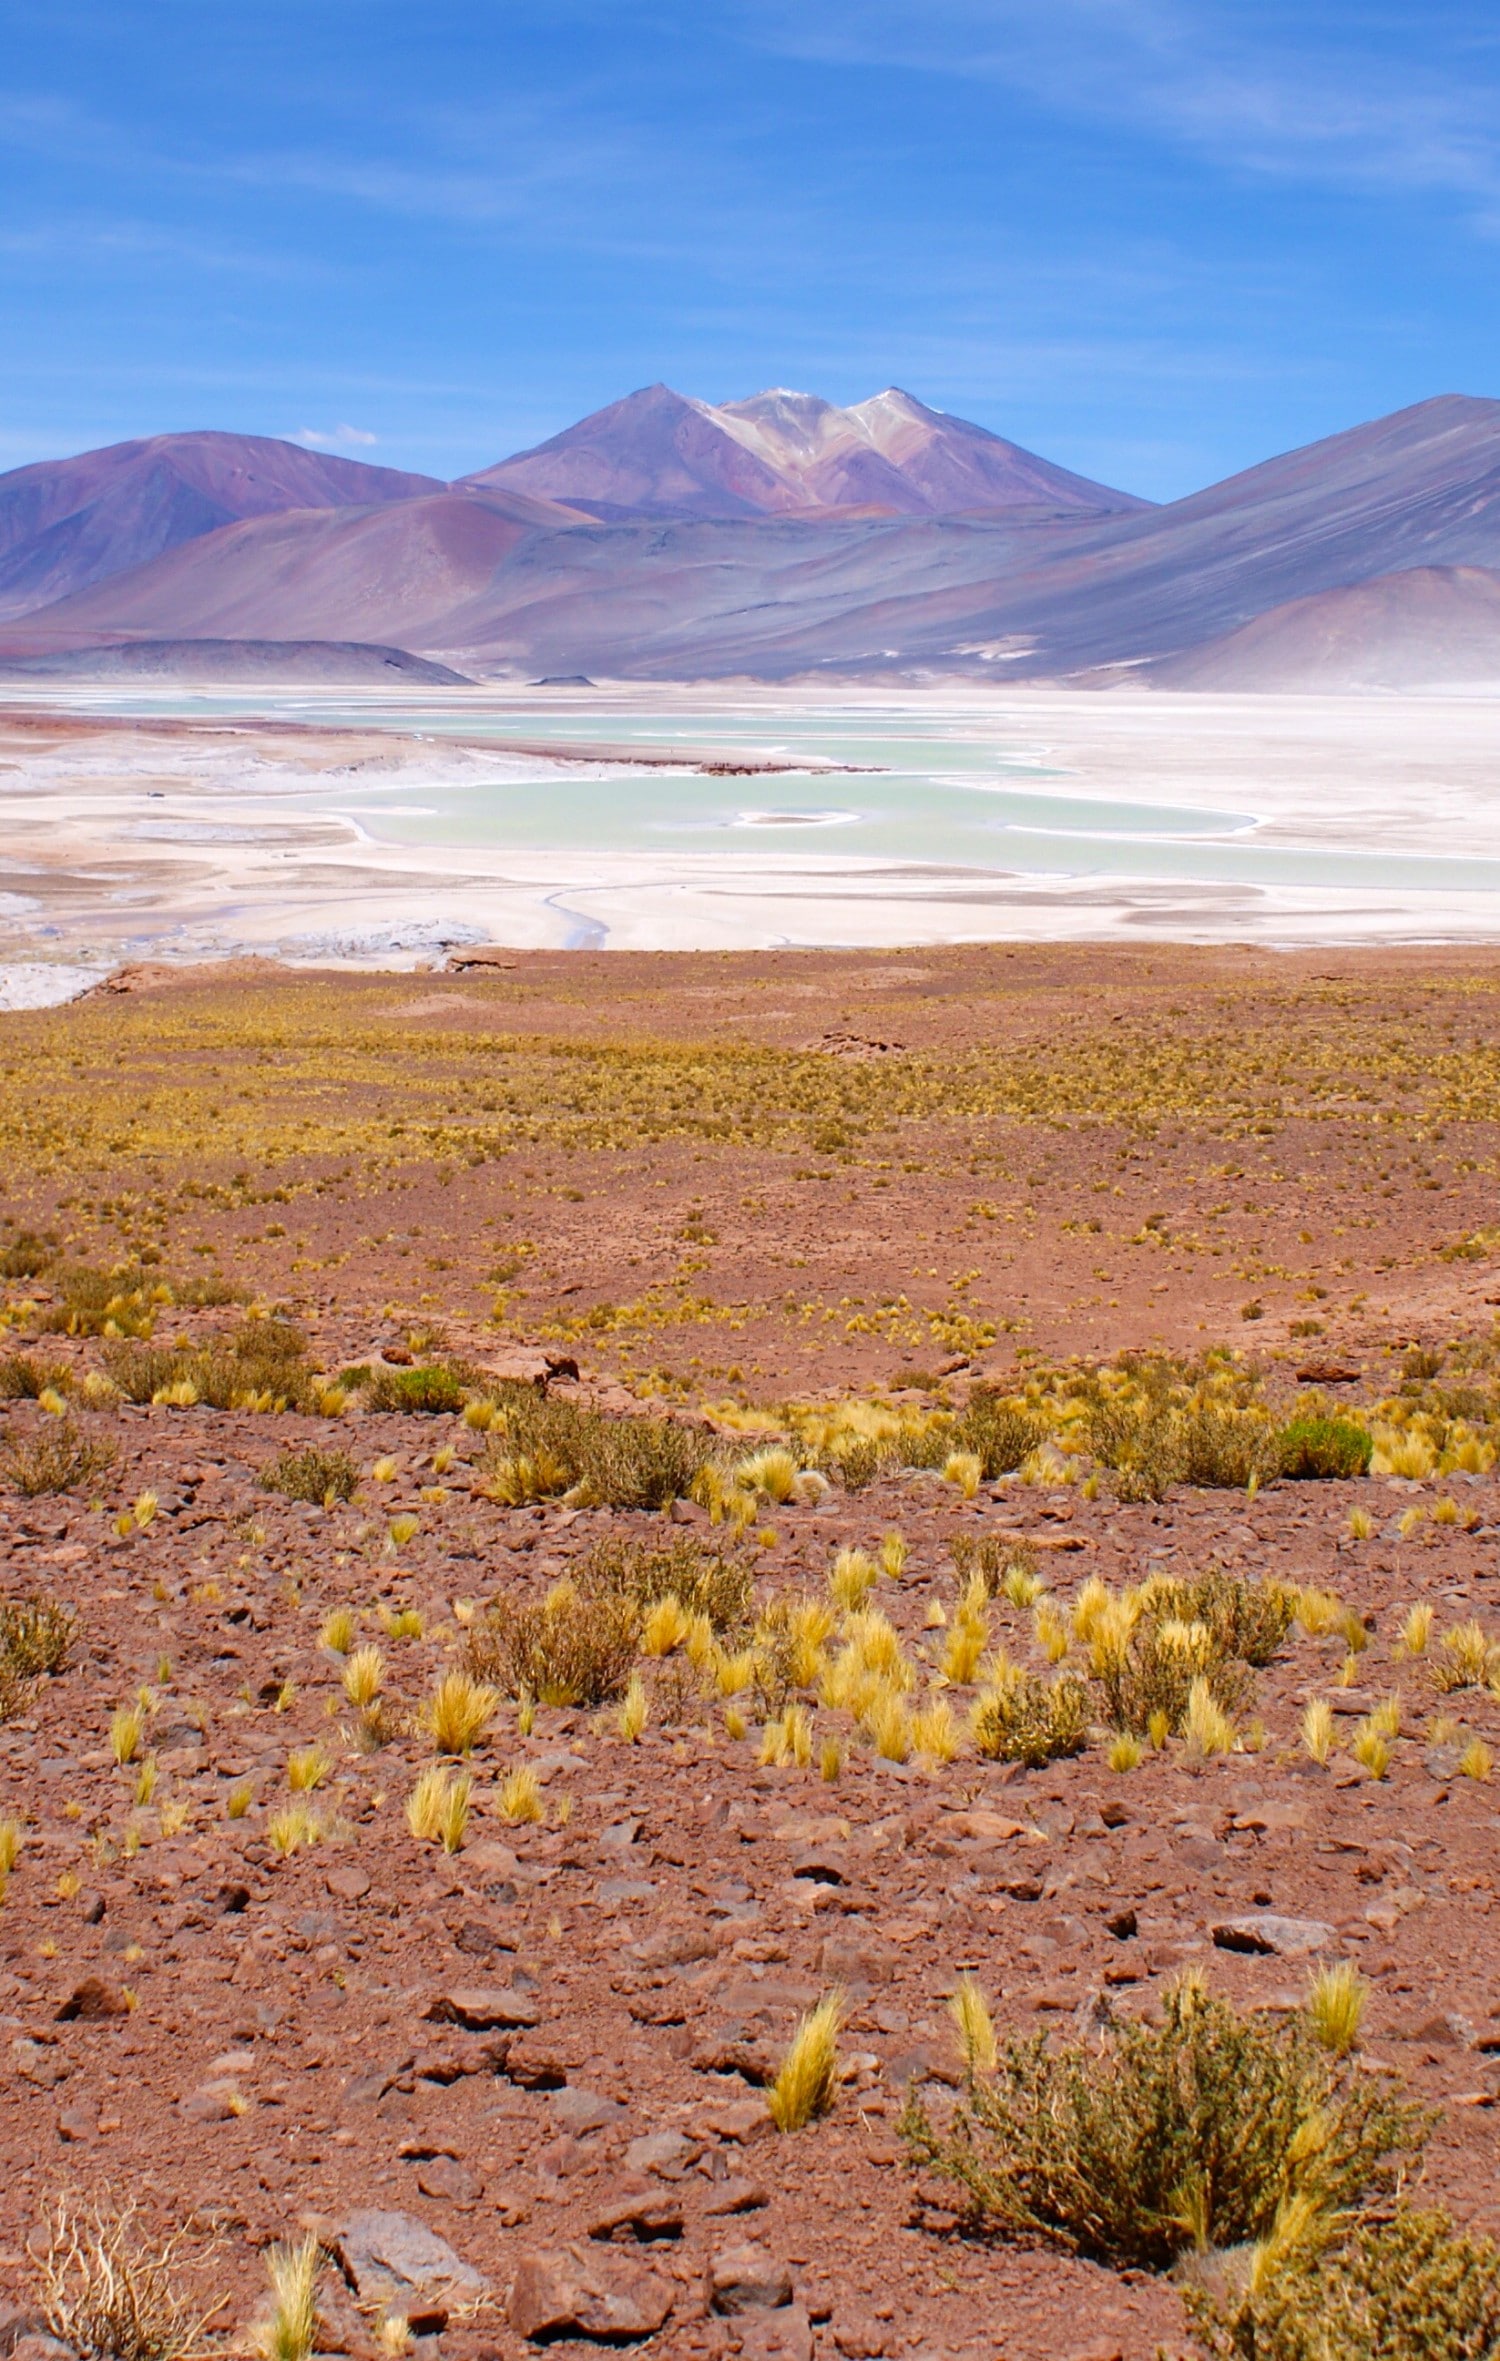 South America Travel Itinerary - Dont forget the Atacama Desert